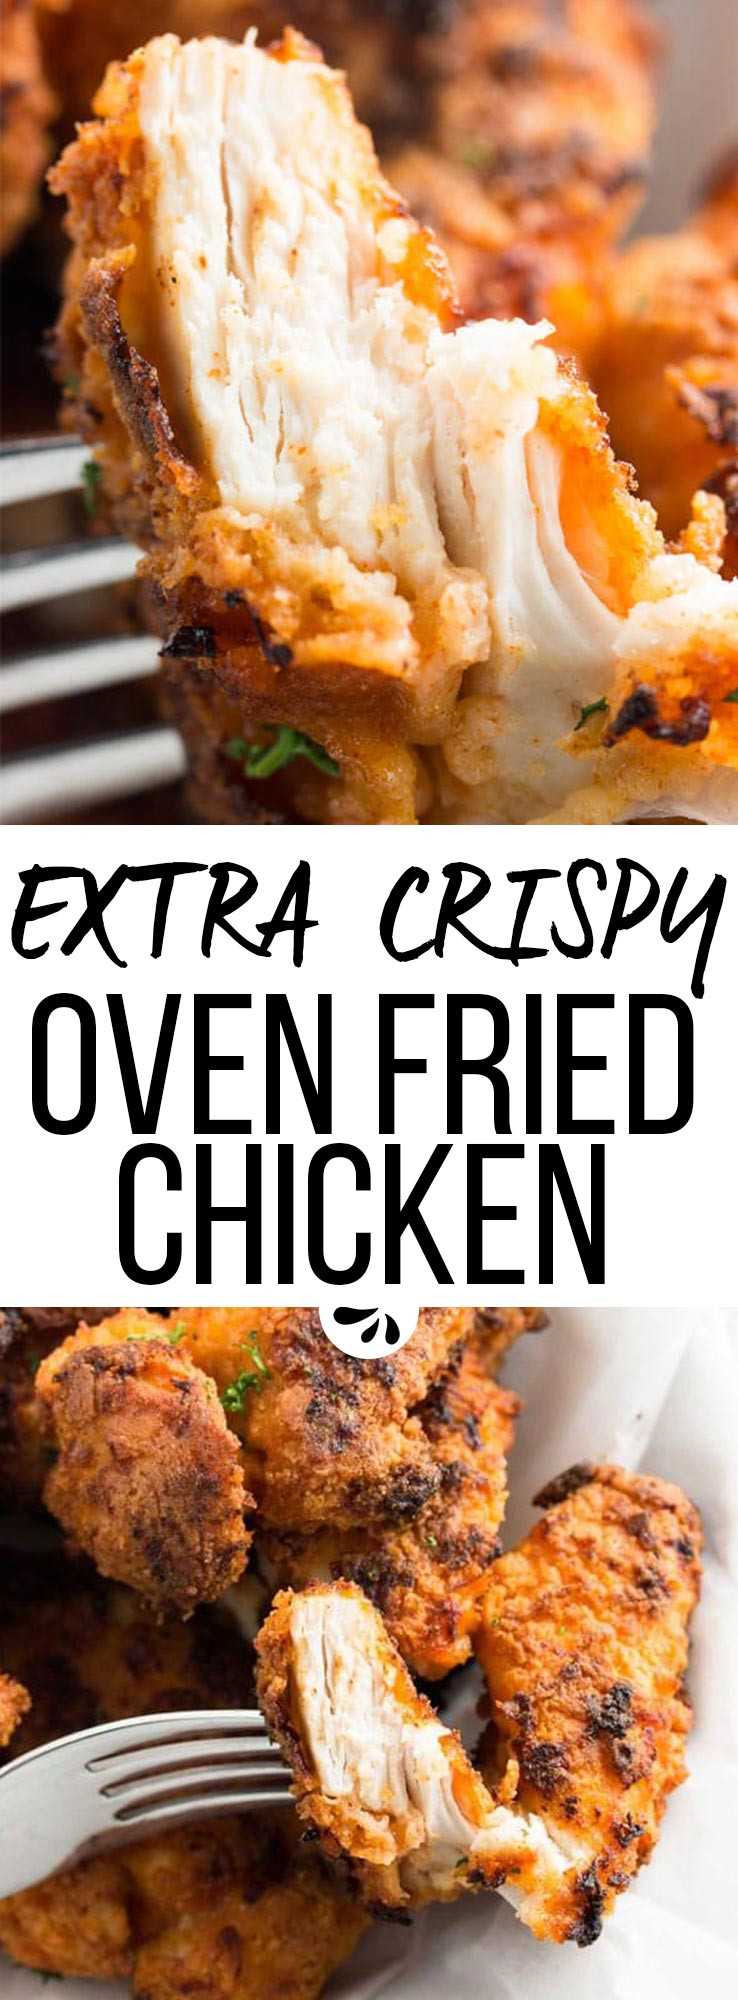 Healthy Sides For Fried Chicken
 Crispy Oven Fried Chicken Recipe